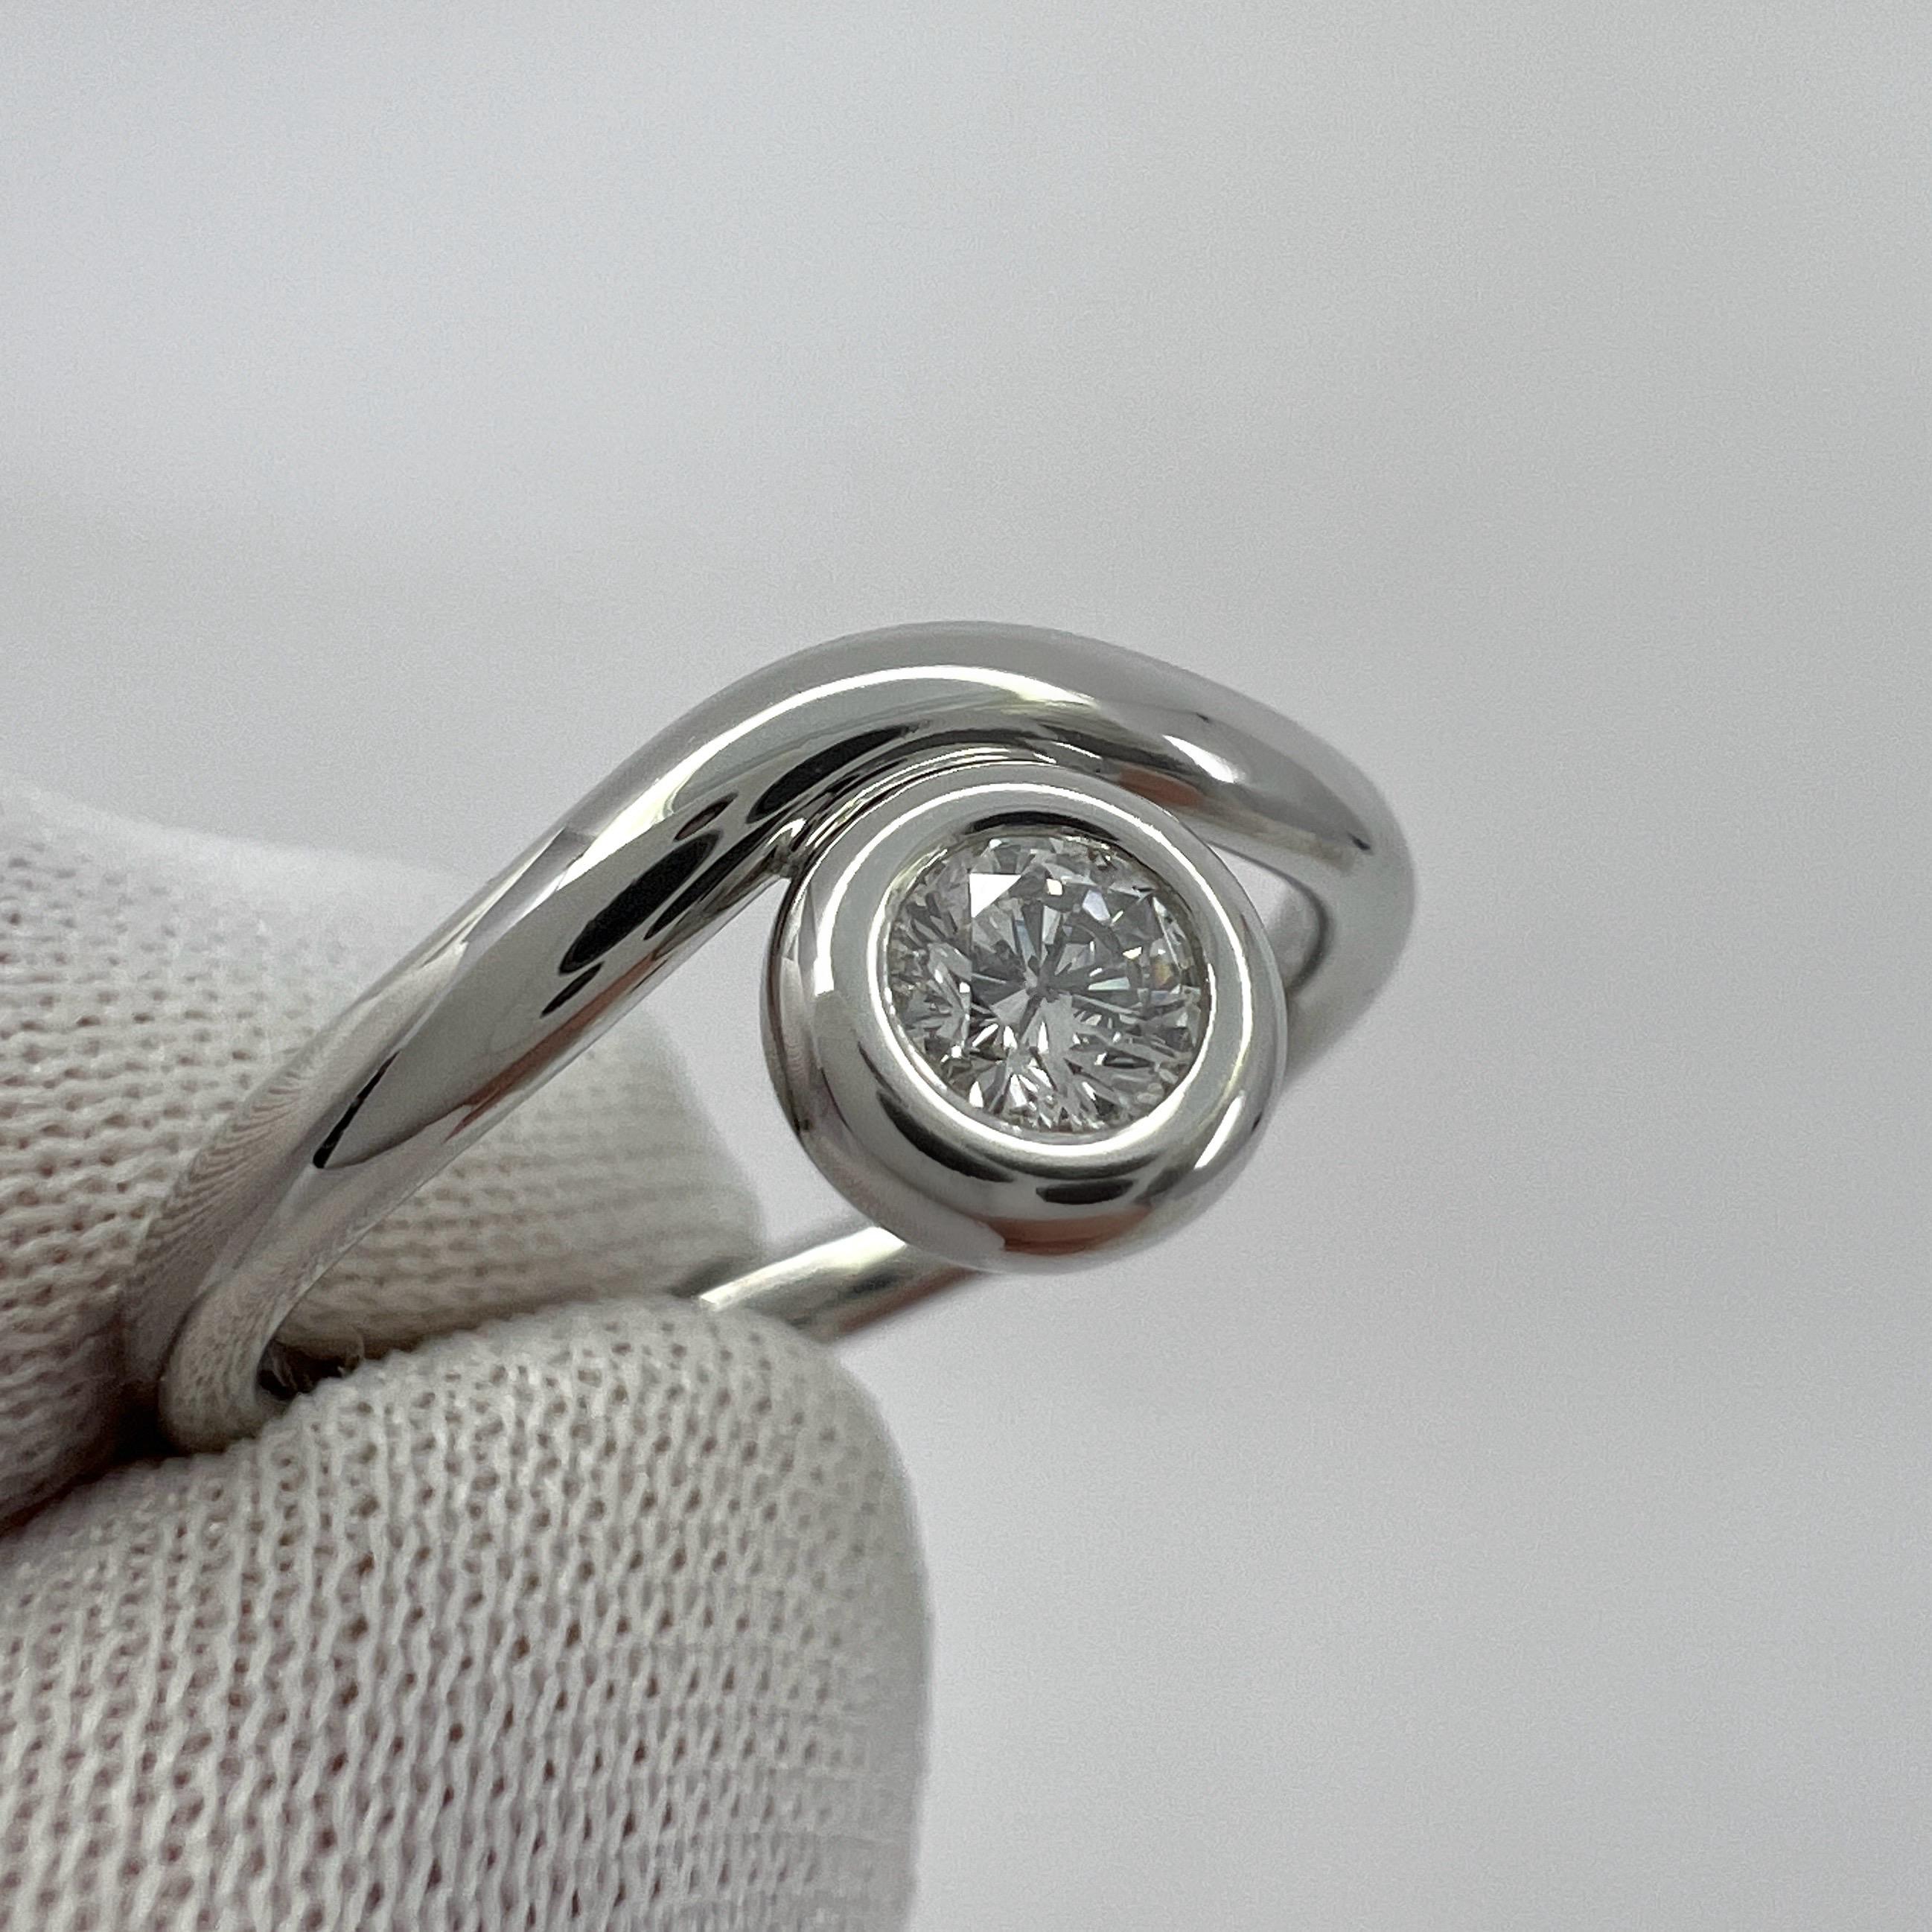 Vintage Tiffany & Co. Round Cut Diamond By The Yard 950 Platinum Solitaire Ring For Sale 1